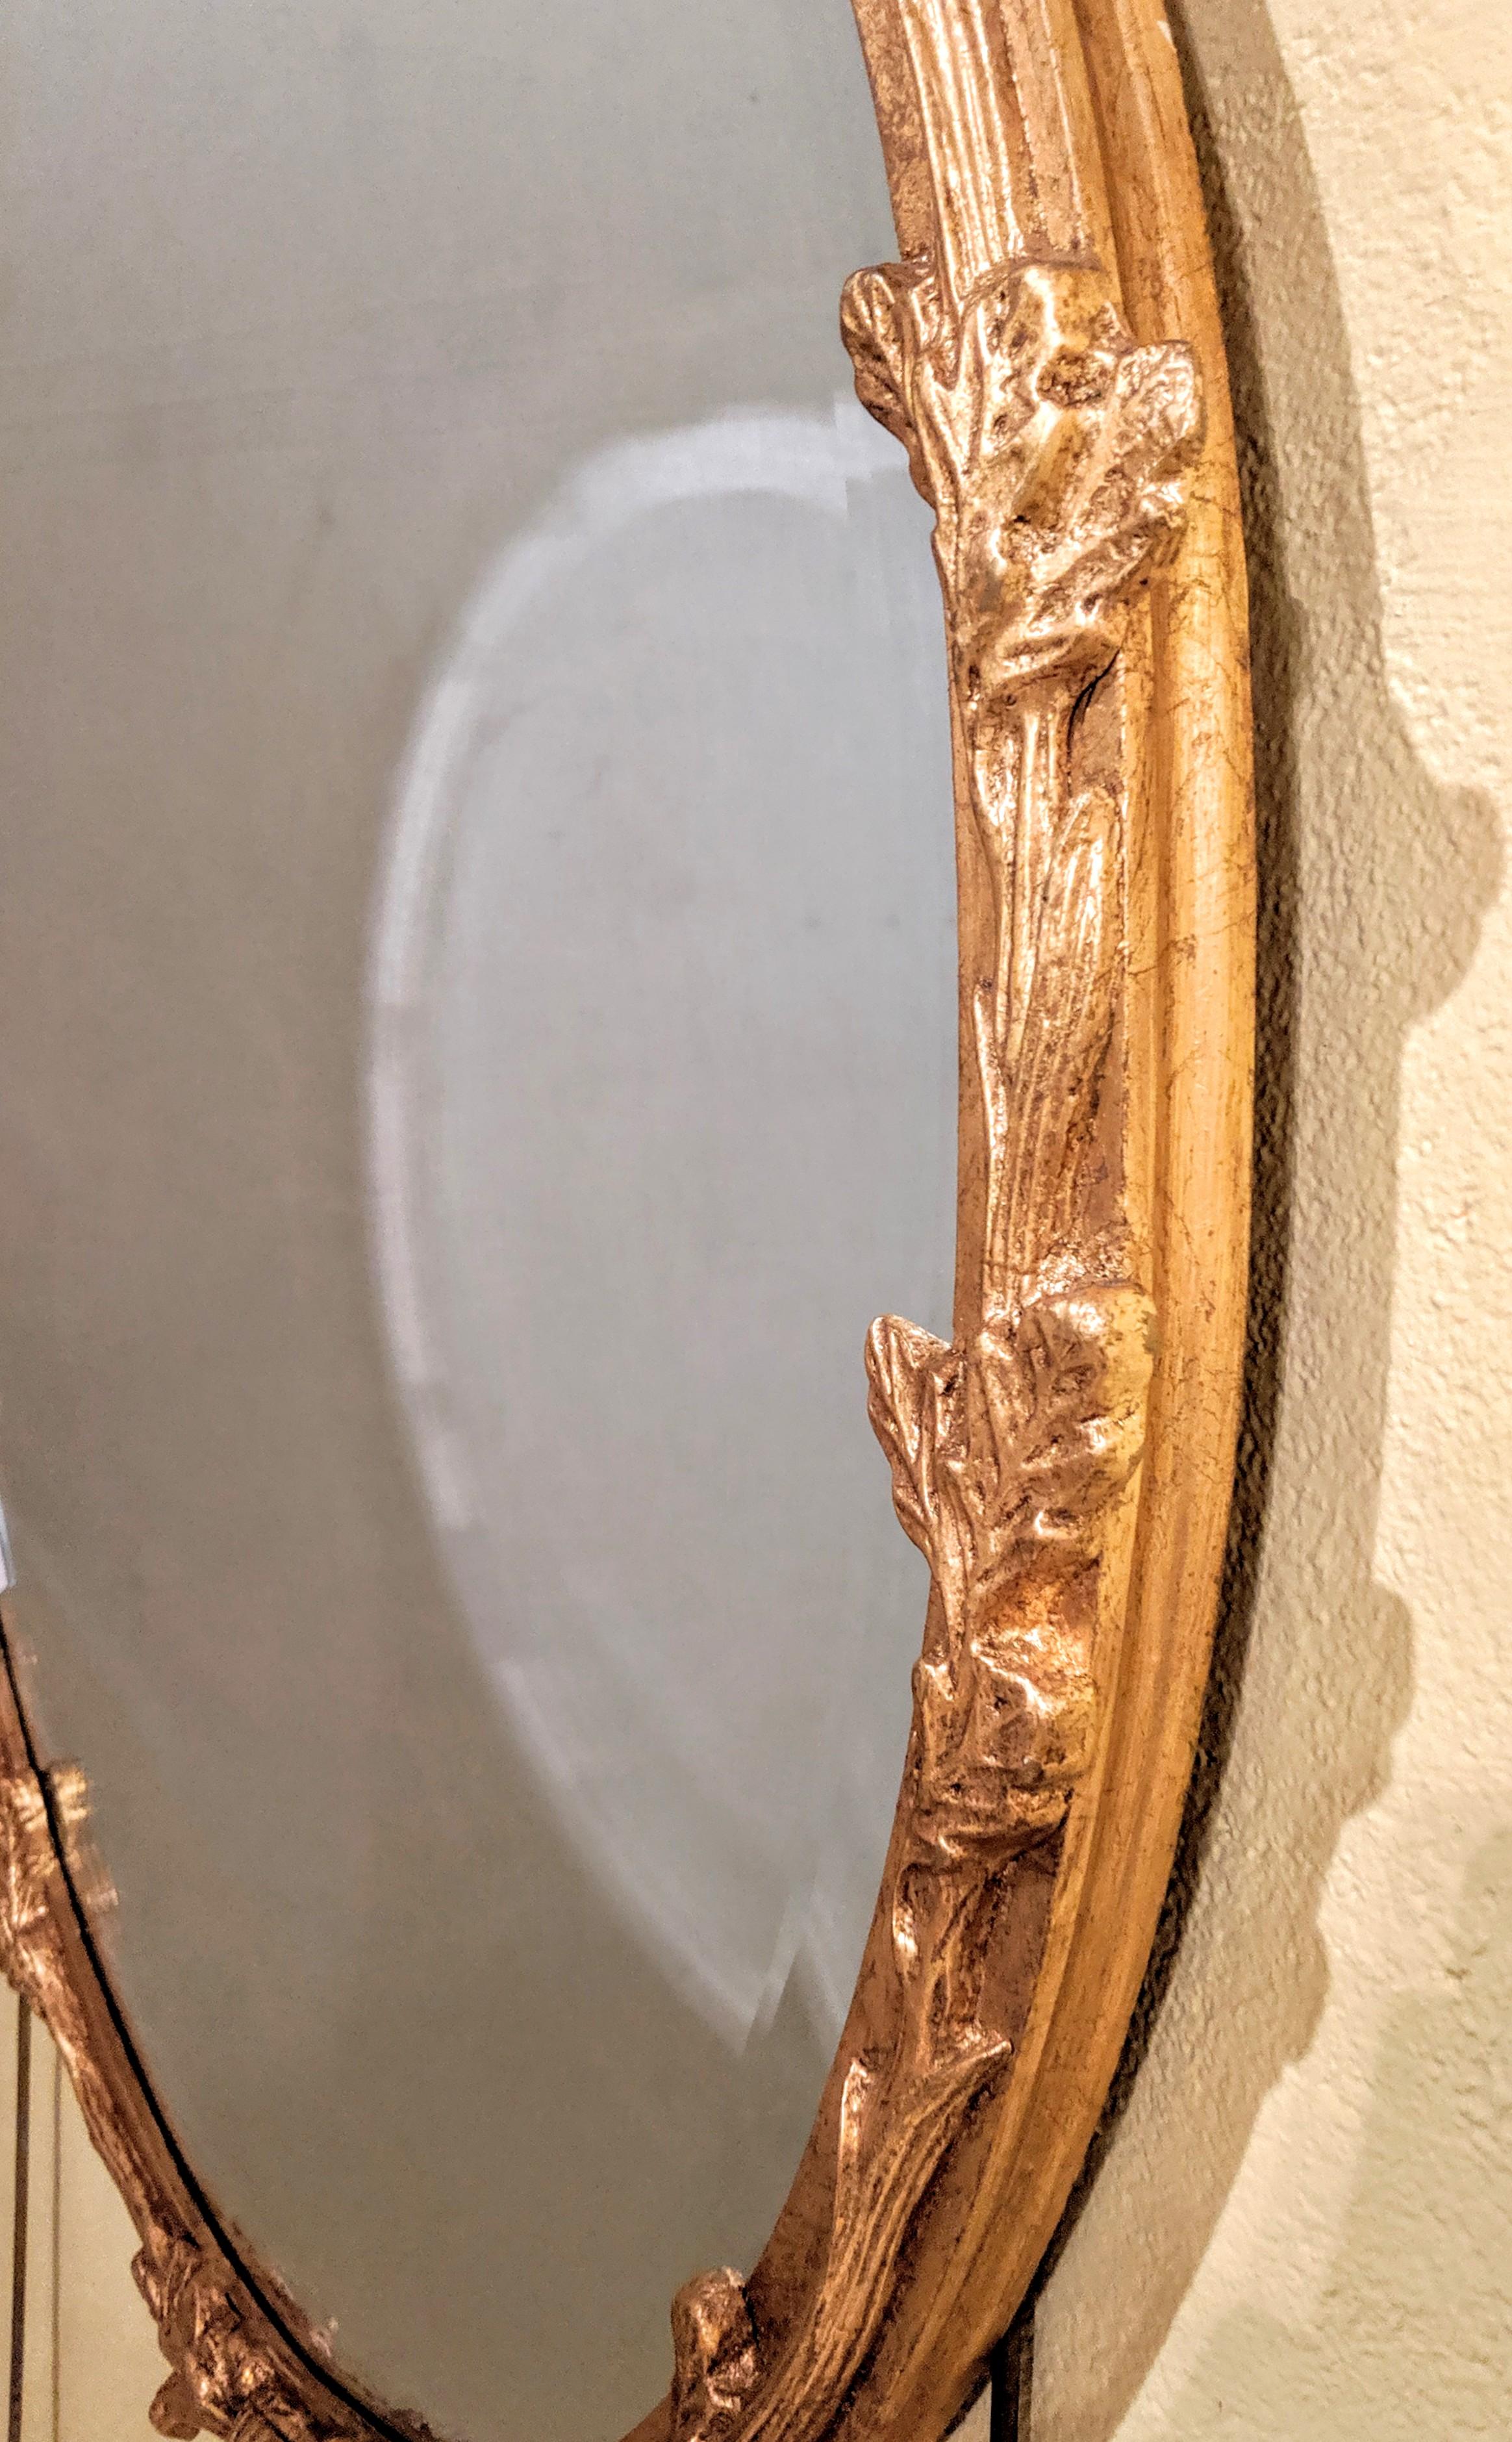 Friedmans wall console or mantel mirror. Giltwood nicely carved wall mirror with oval frame.